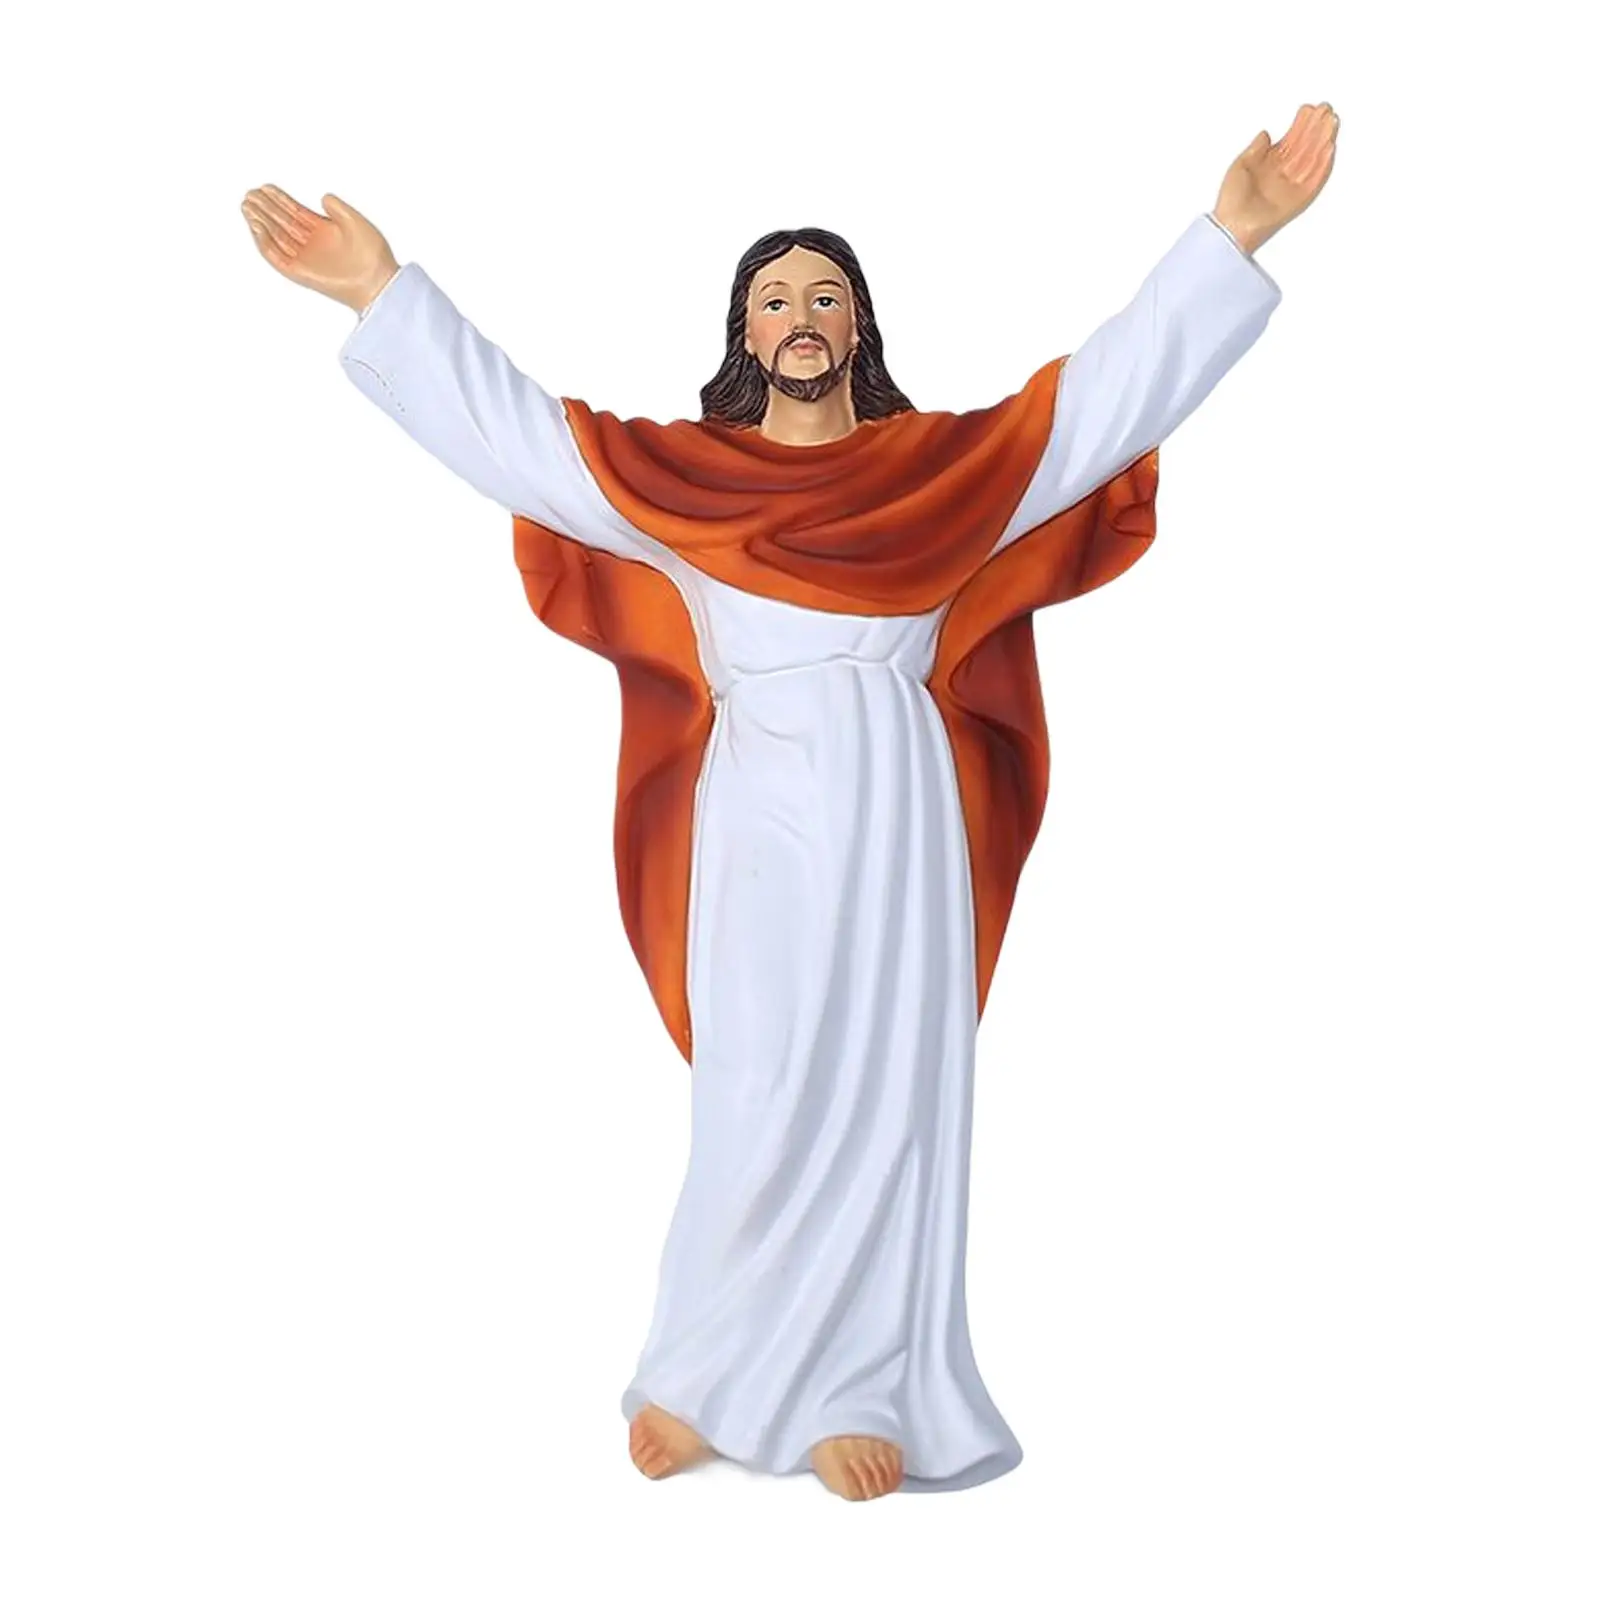 Religious Holy Jesus Figurine Statue Collection Craft Art Figure Sculpture for Christmas Home Tabletop Ornament Birthday Gift